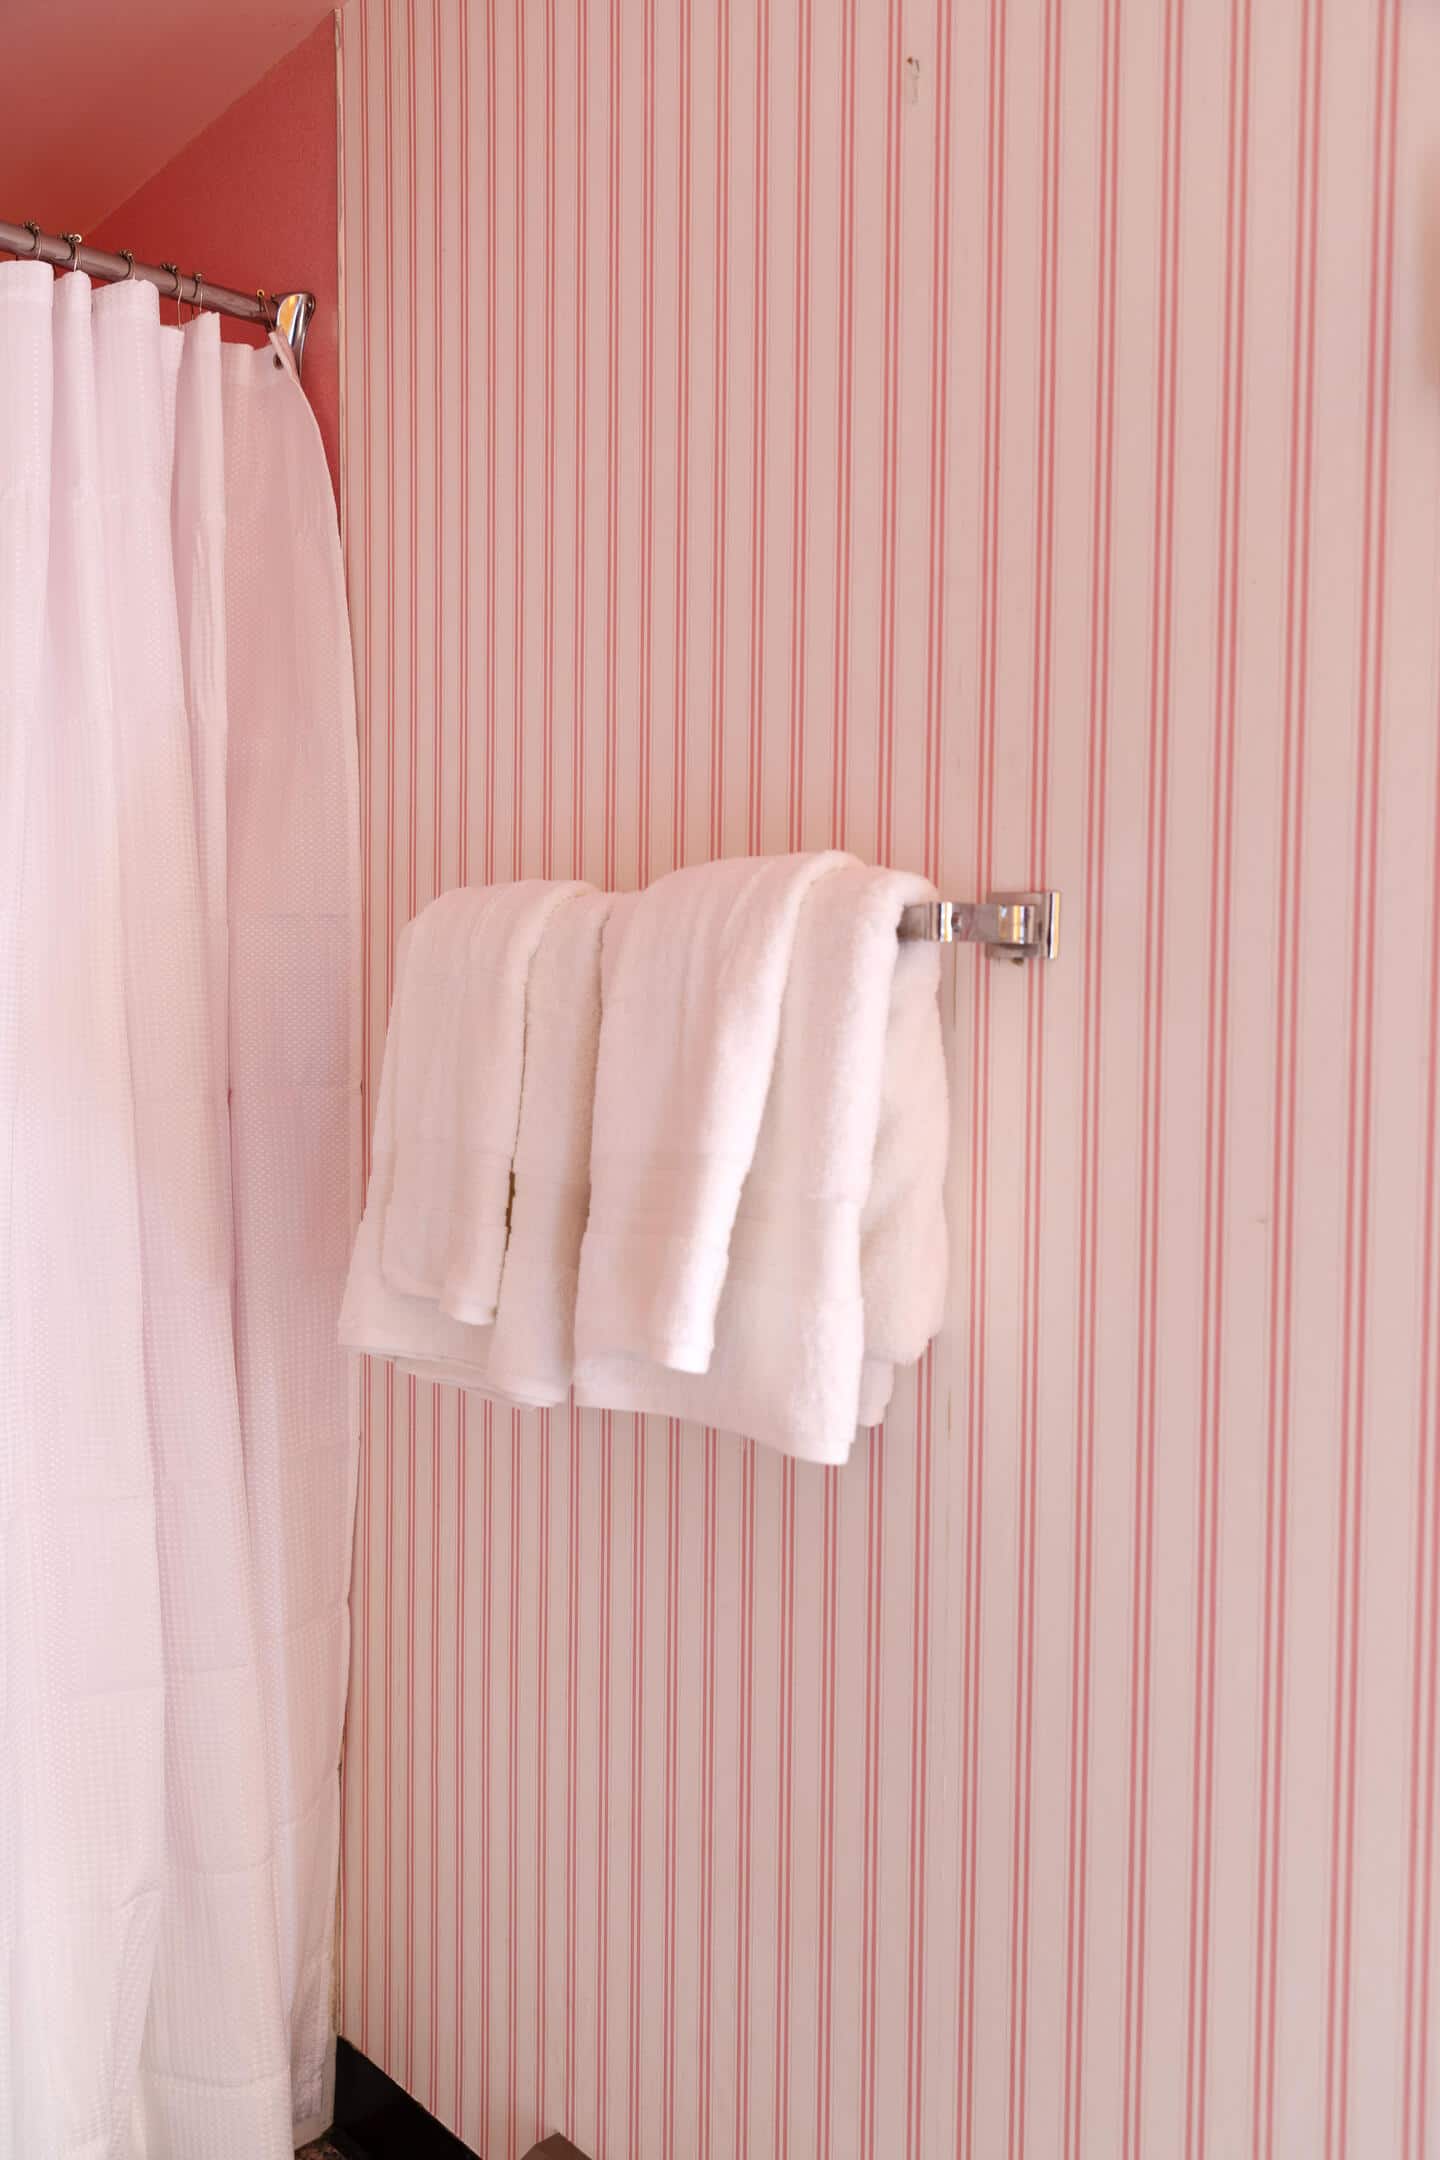 Close-up of towels hanging on the wall.